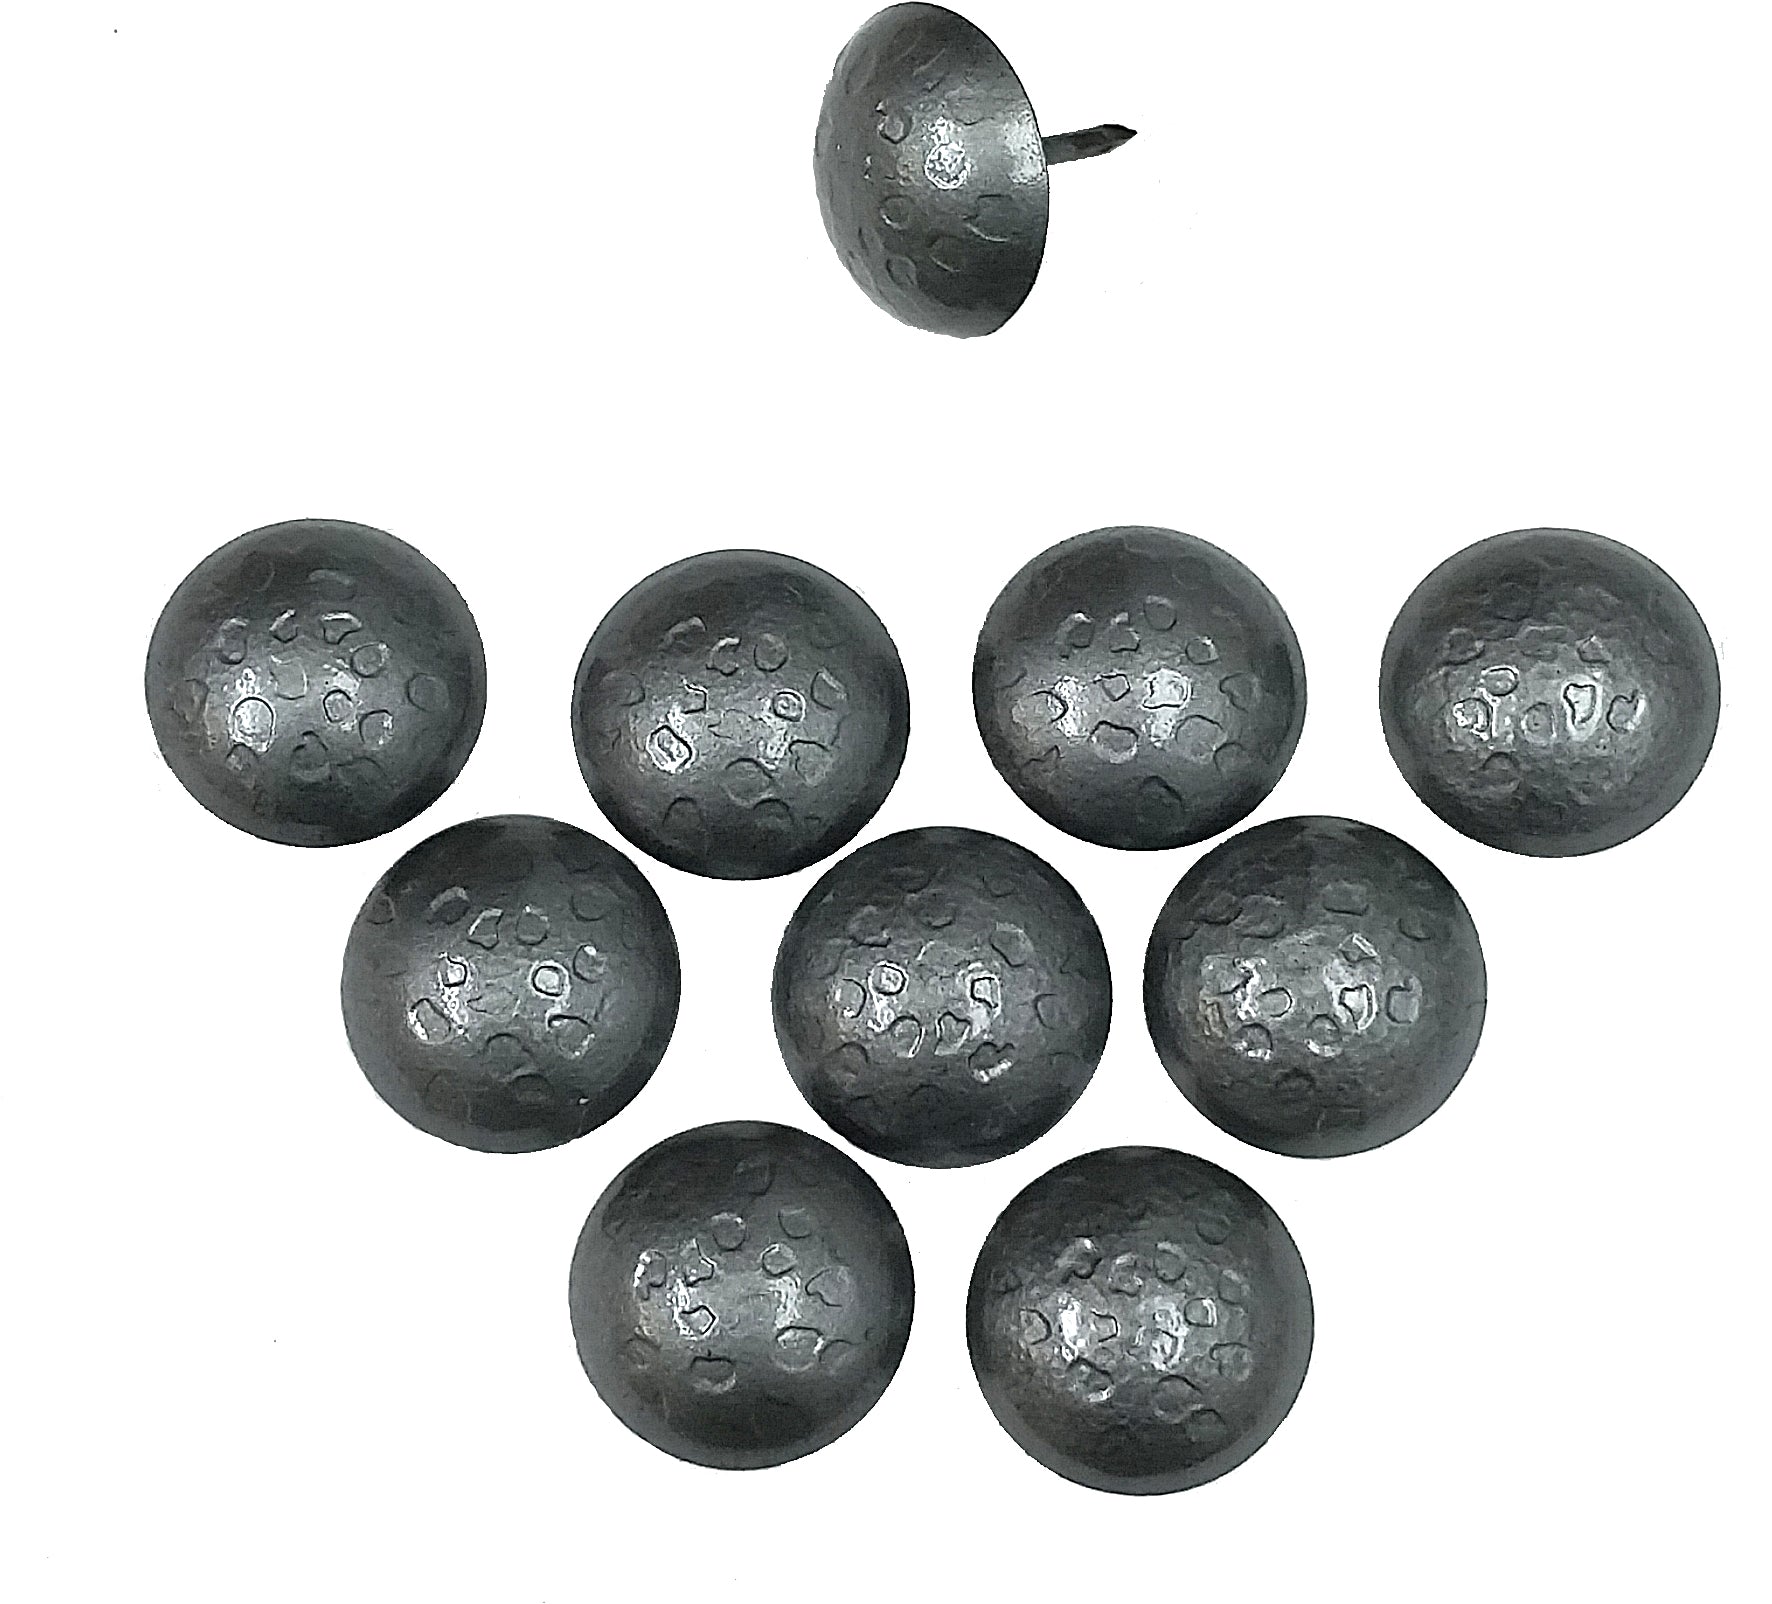 Clavos , Decorative Nails, 1"  with lightly distressed look, Pewter finish (Various pack sizes) - Wild West Hardware